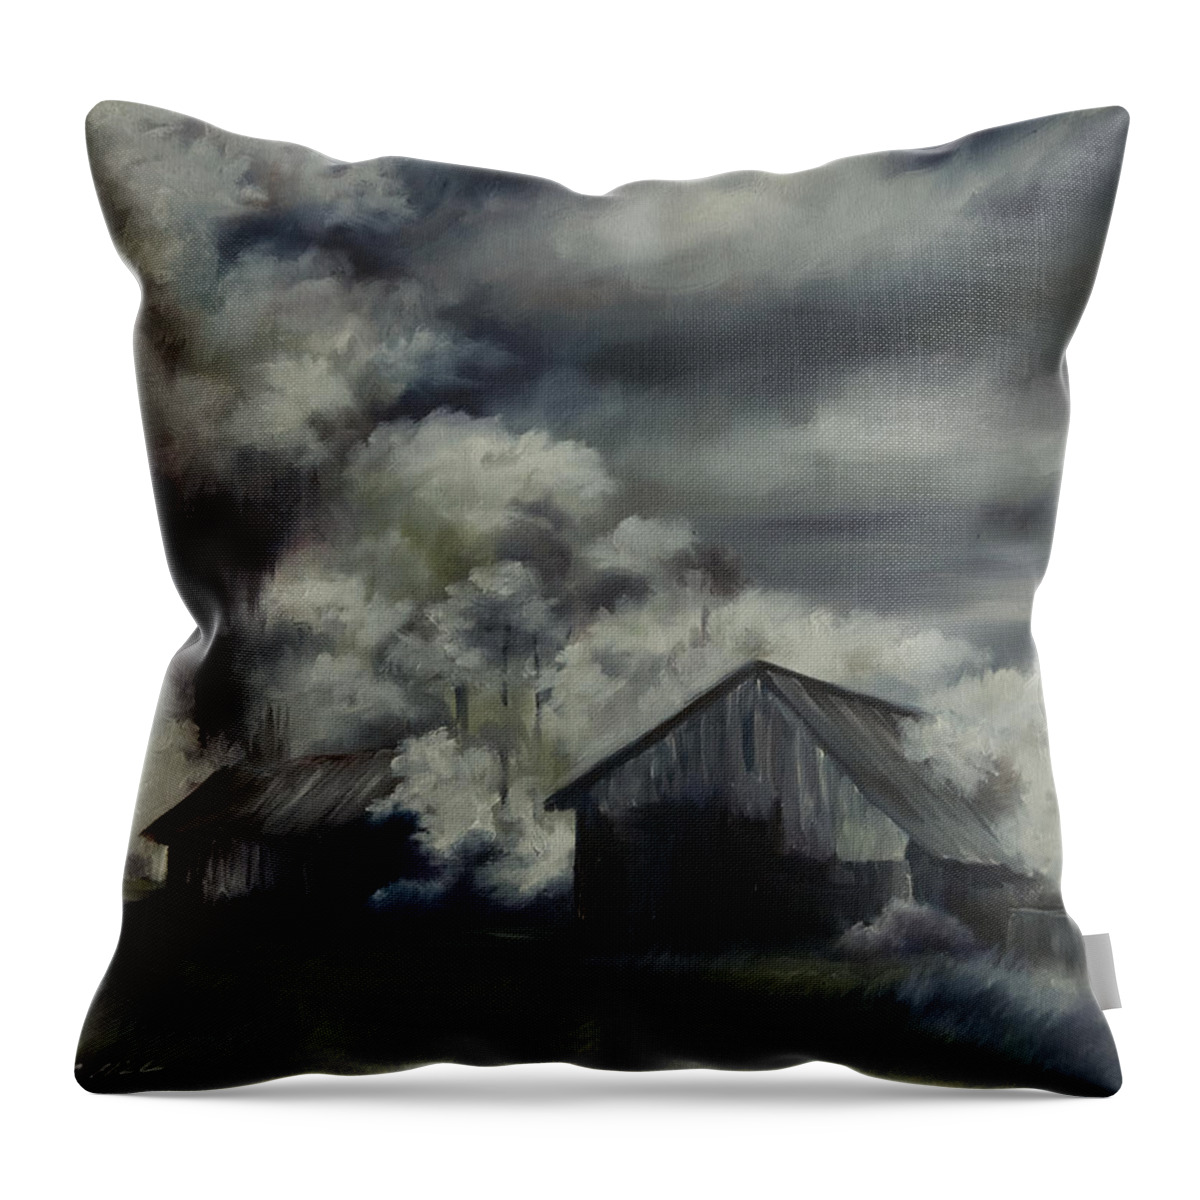 Motel; Route 66; Desert; Abandoned; Delapidated; Lost; Highway; Route 66; Road; Vacancy; Run-down; Building; Old Signage; Nastalgia; Vintage; James Christopher Hill; Jameshillgallery.com; Foliage; Sky; Realism; Oils; Barn Throw Pillow featuring the painting Night Barn by James Hill